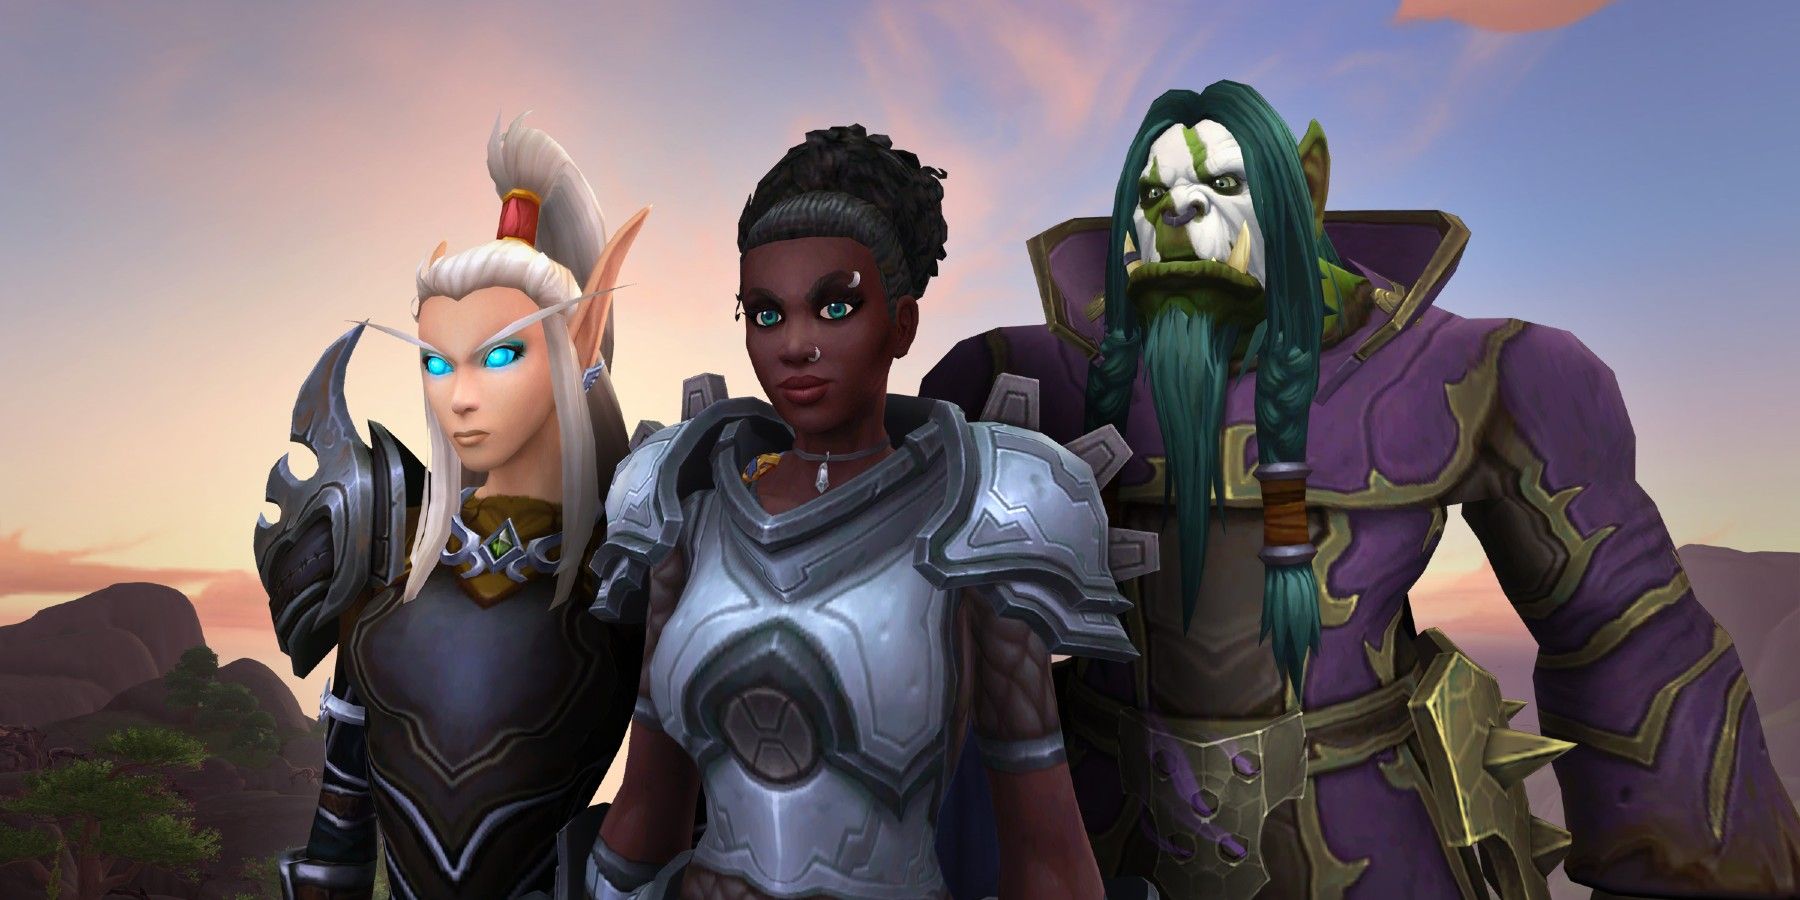 World Of Warcraft Overhauls Character Creation In Pre-Shadowlands Patch